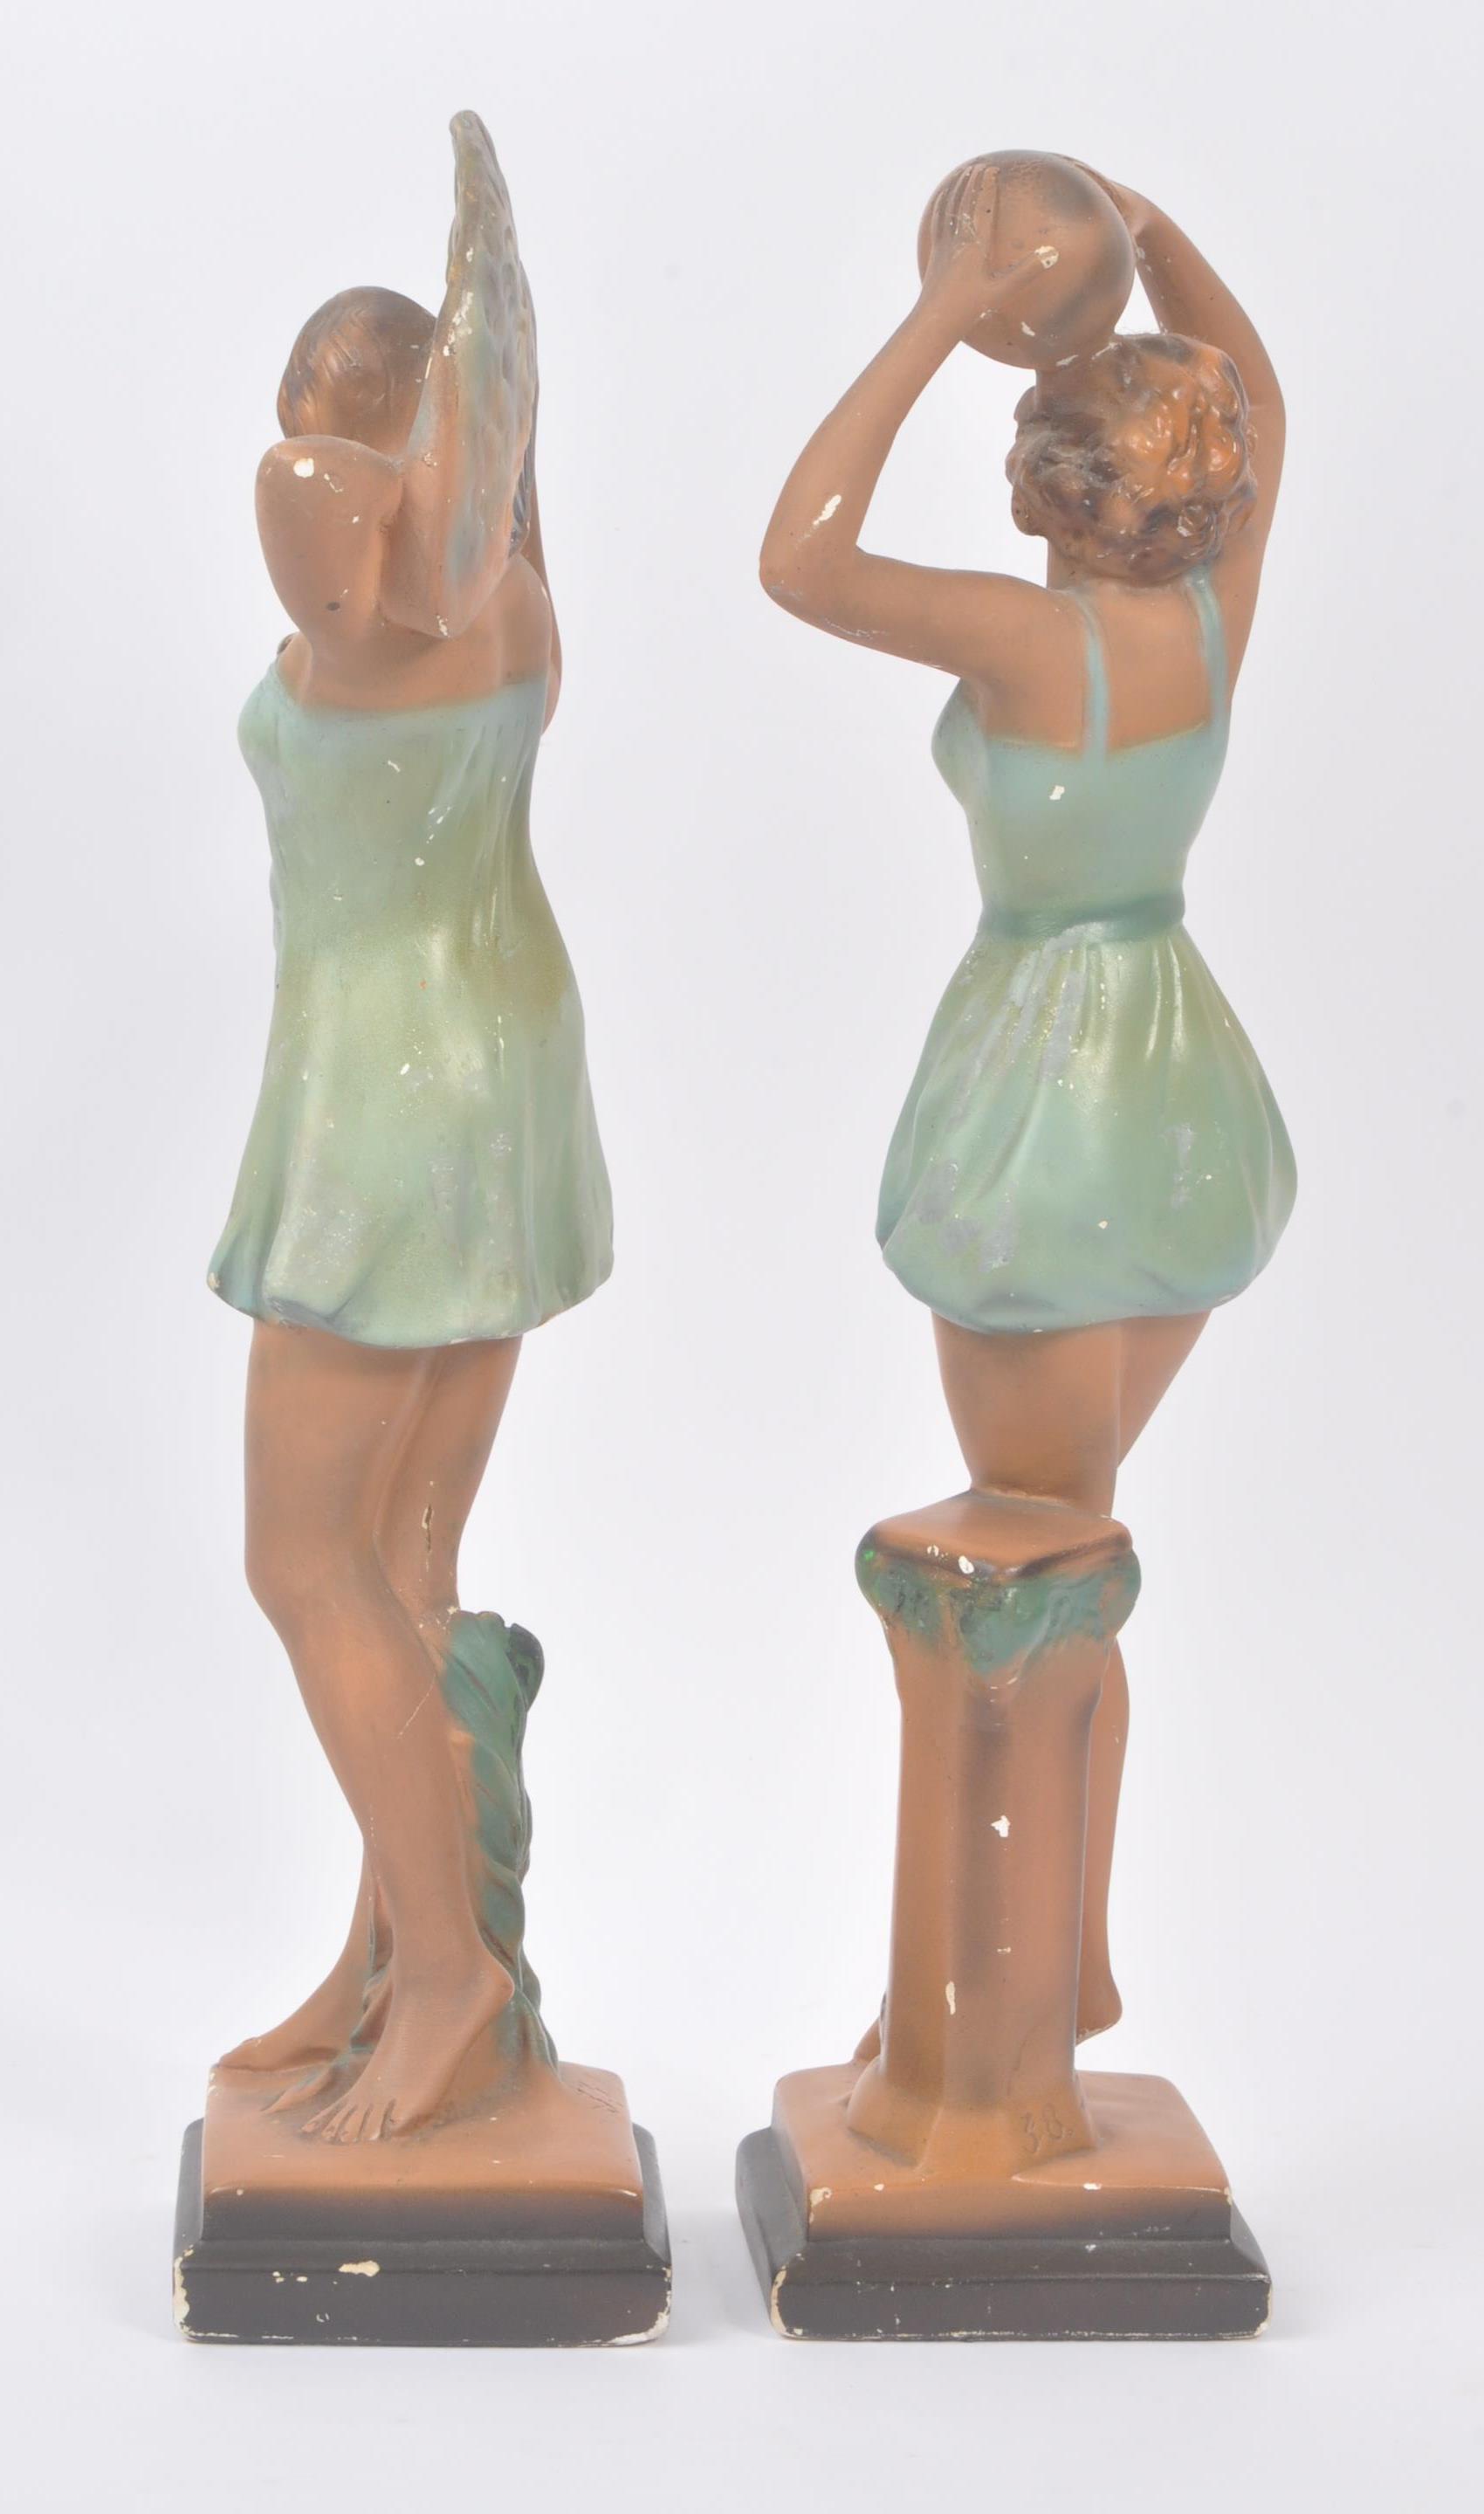 PAIR OF EARLY 20TH CENTURY ART DECO FIGURINES - Image 4 of 6